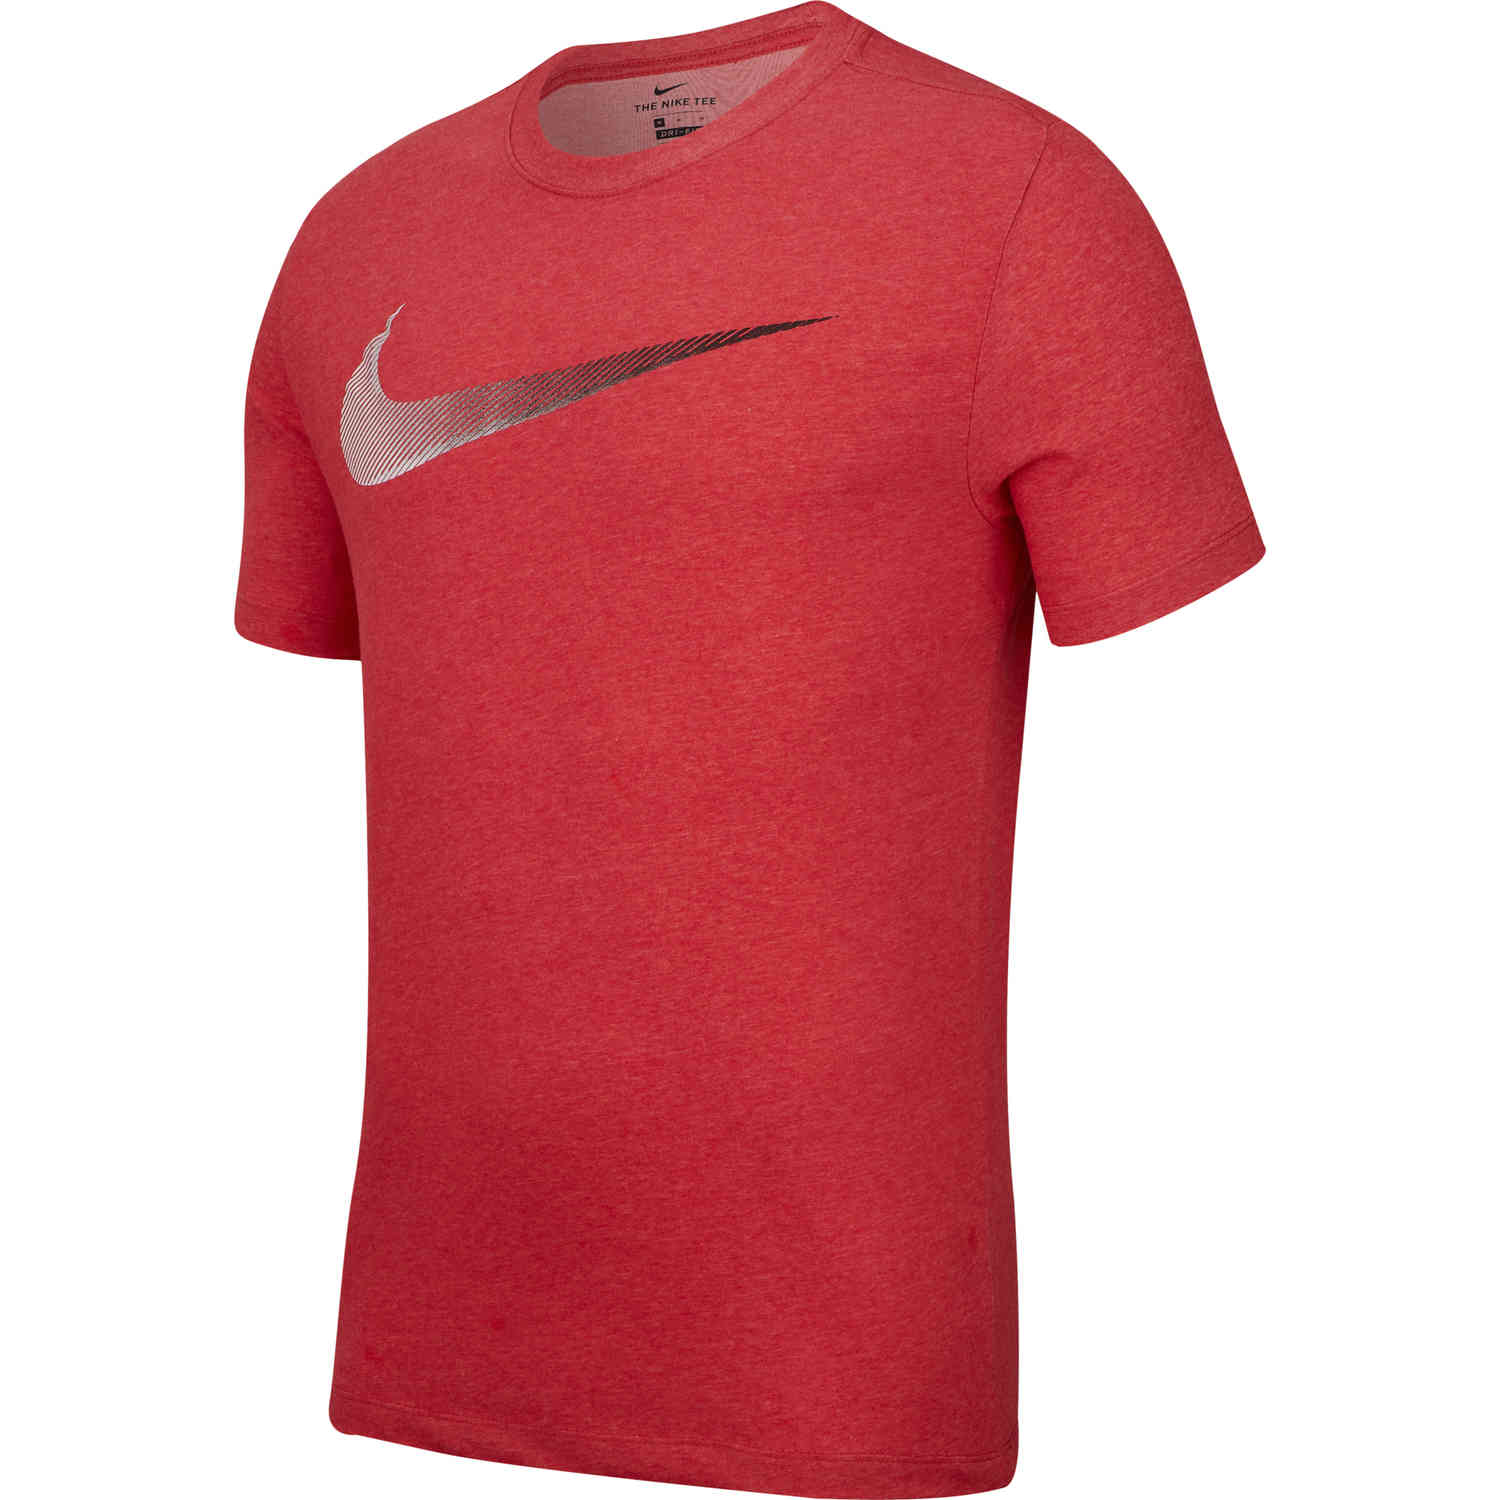 white nike shirt with red swoosh